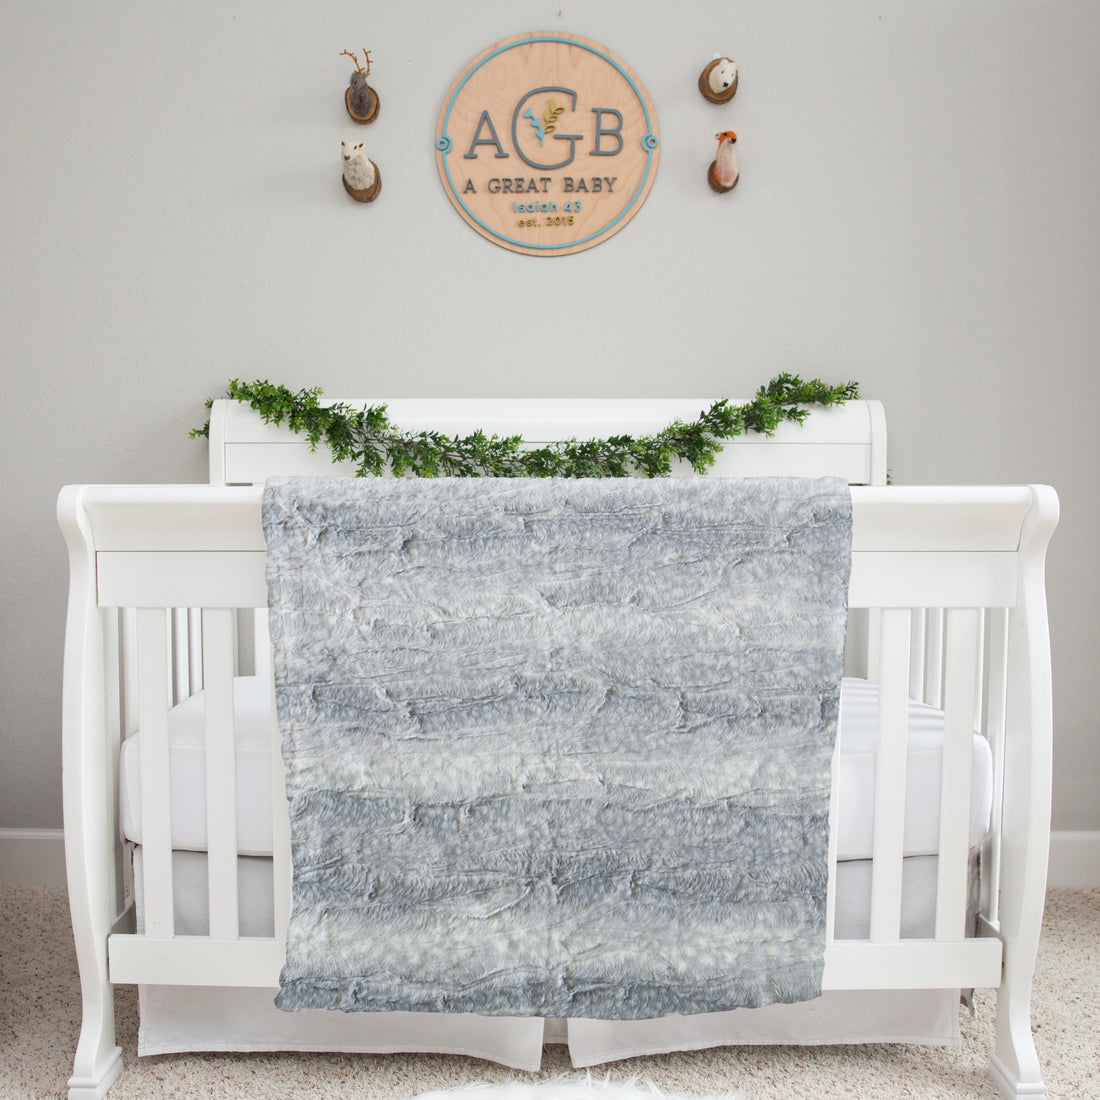 Bryce Canyon Pines Baby Deluxe Blanket